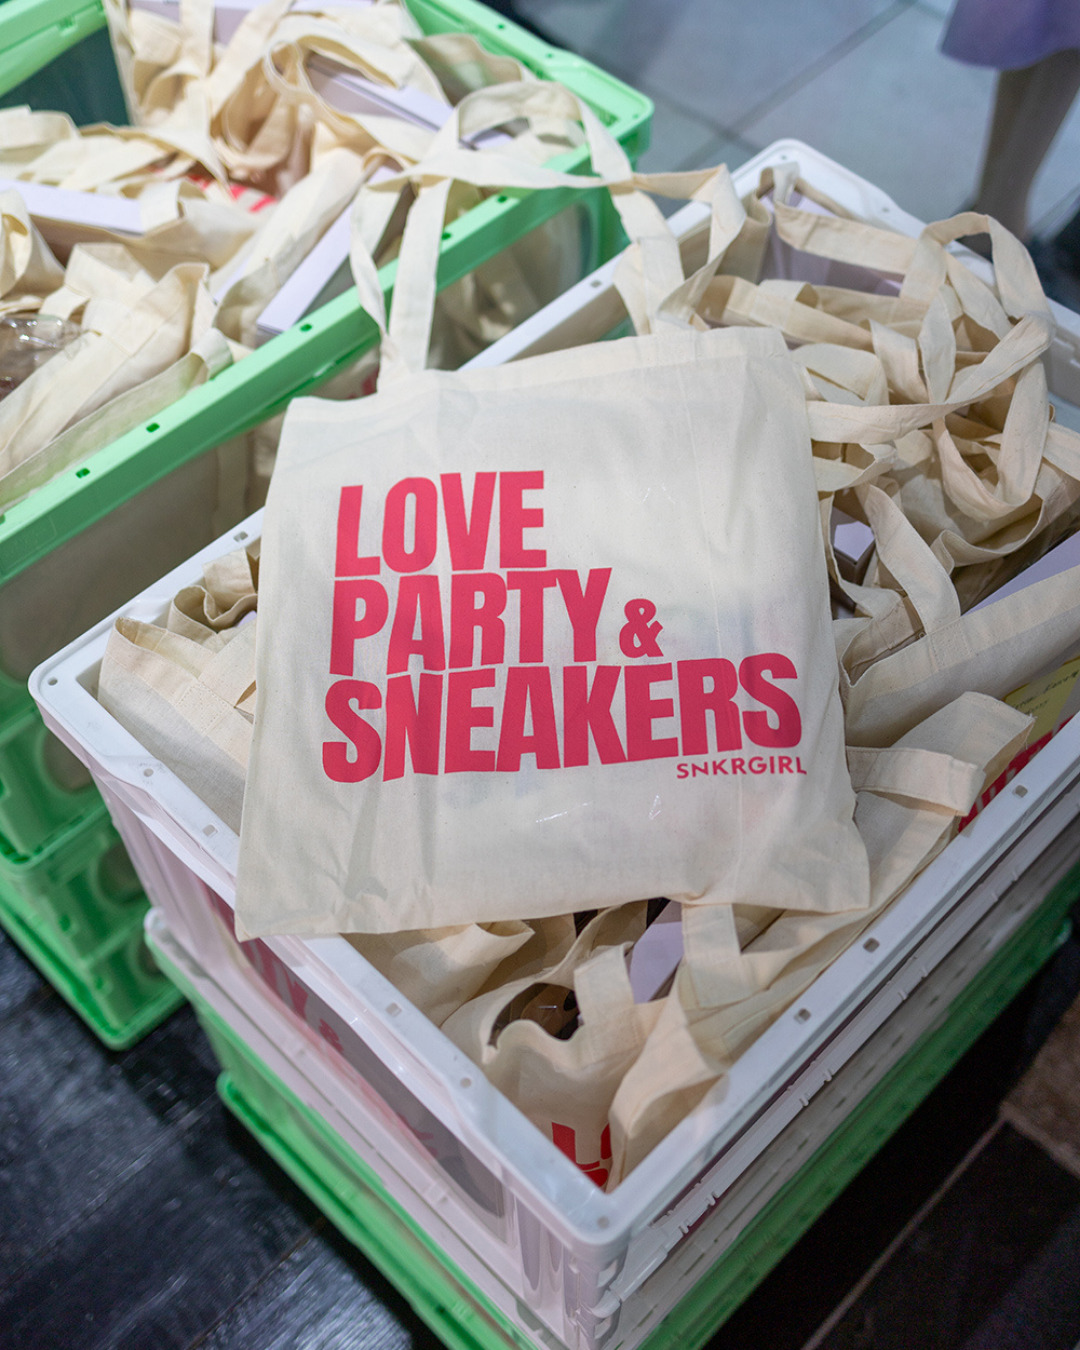 SNKRGIRL Love Party & Sneakers Event vol1 image スニーカーガール イベント ストックエックス